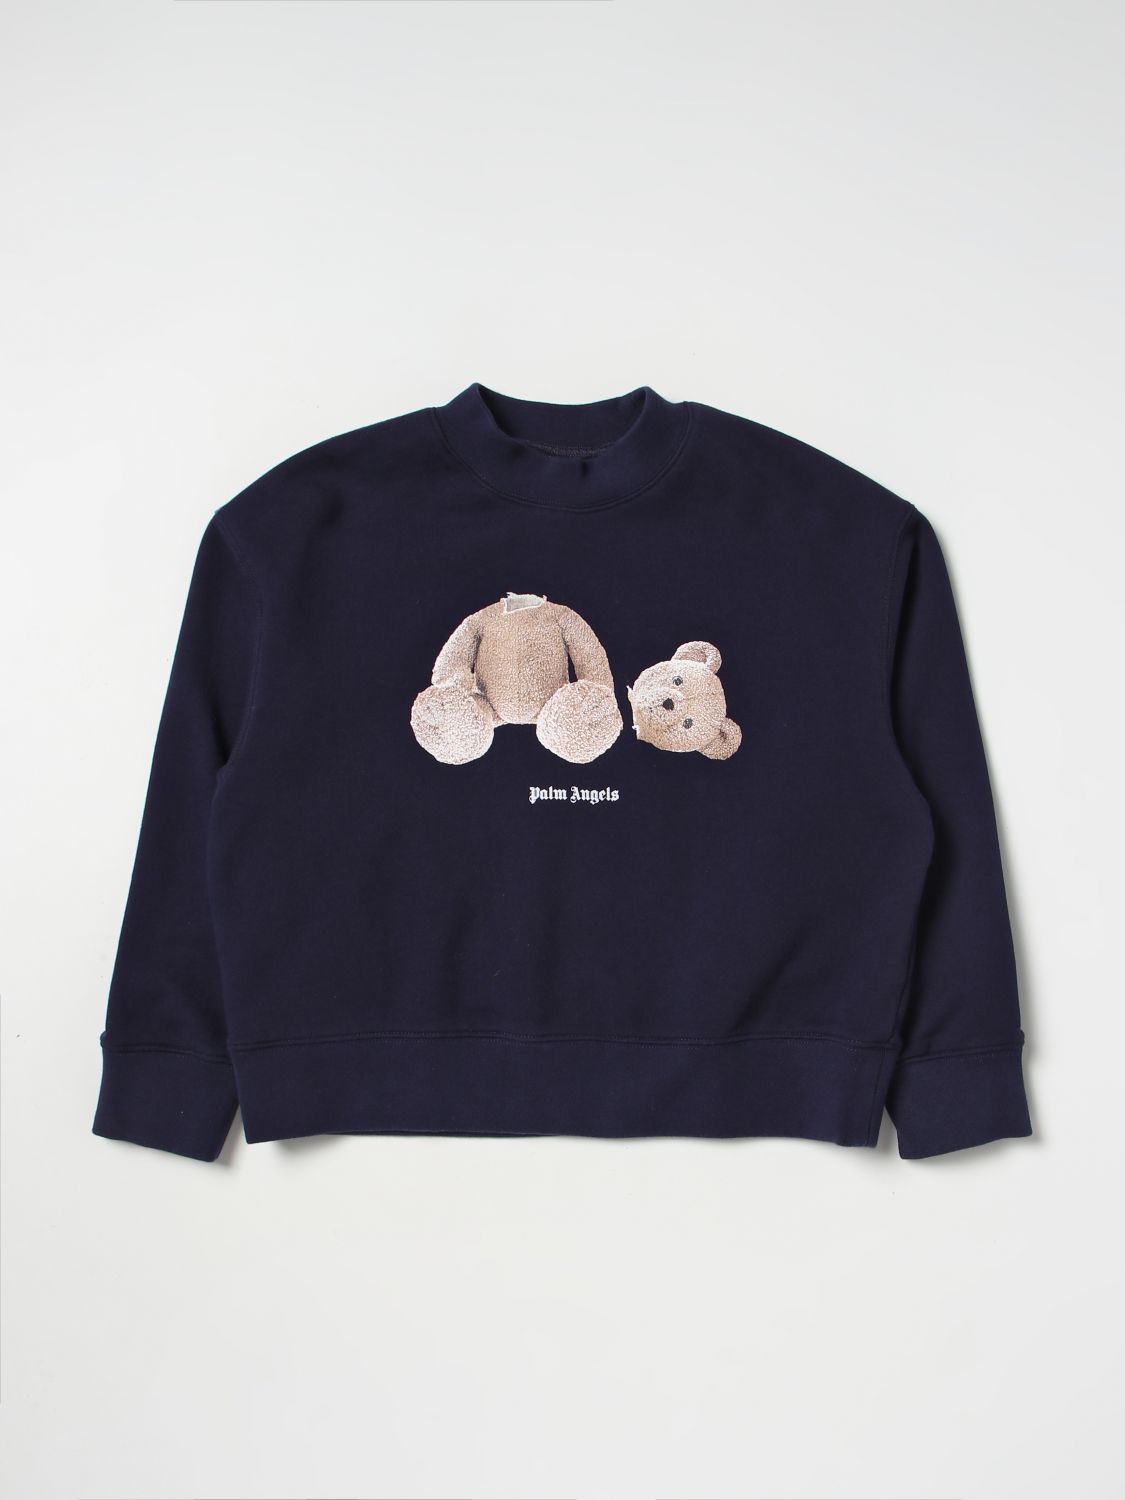 Palm Angels Sweater  Kids Color Navy